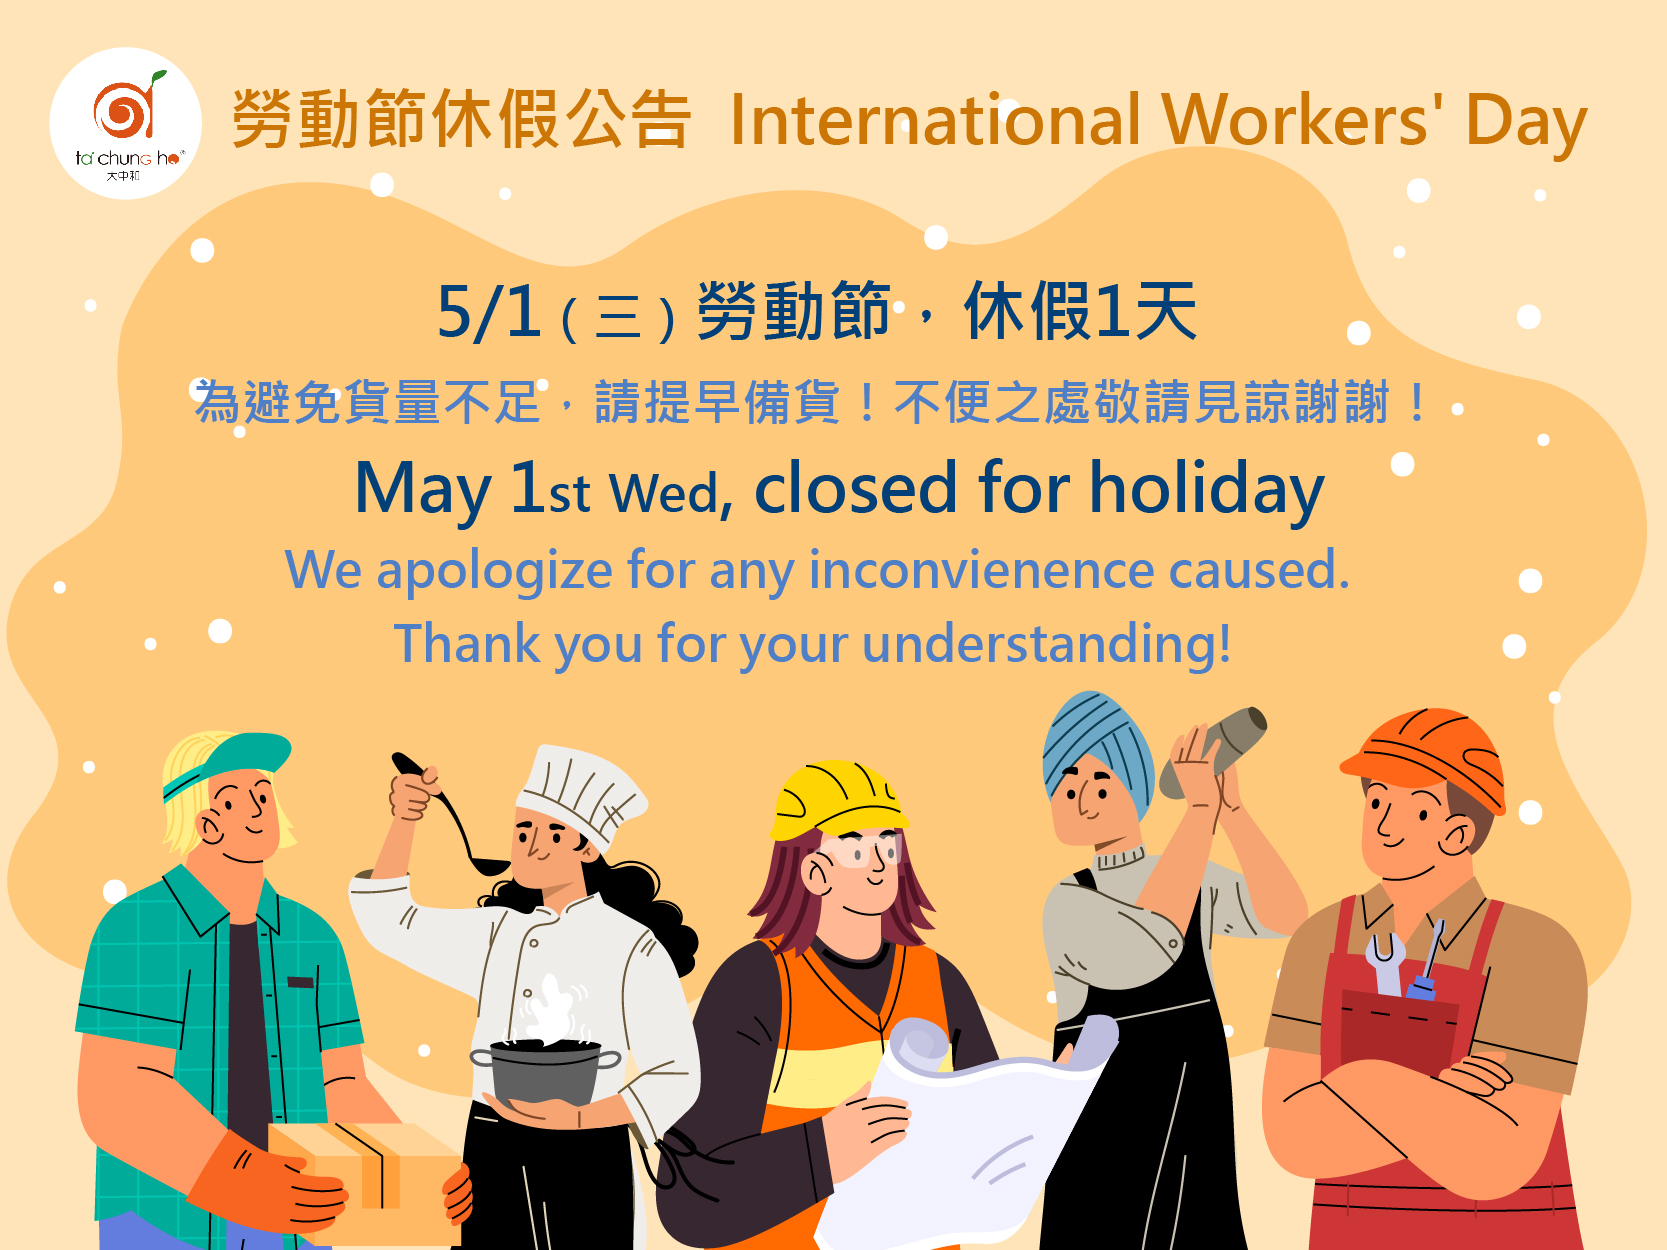 【Holiday Notice】International Workers' Day